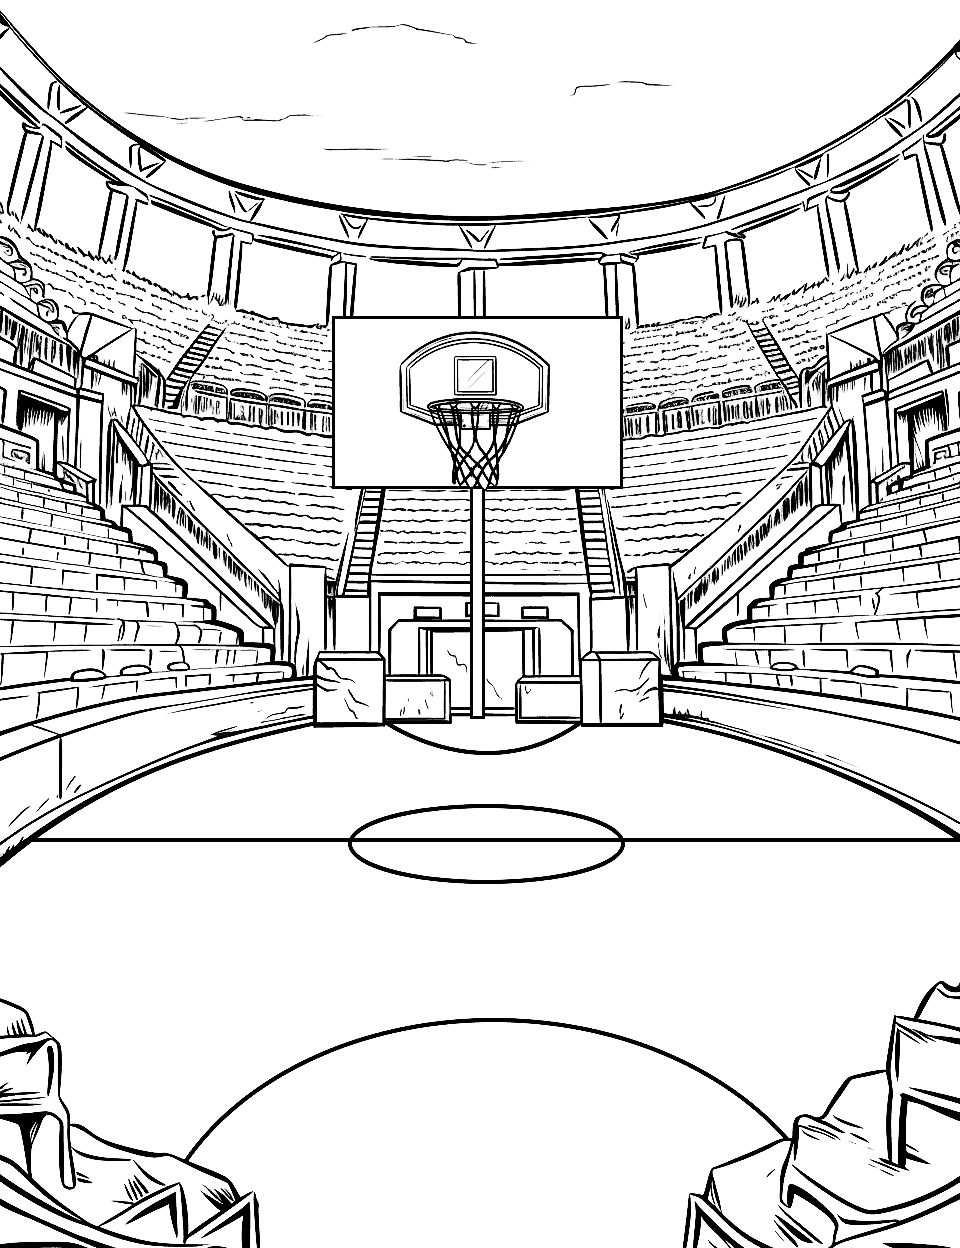 Ancient Greek Arena Court Basketball Coloring Page - A scene set in ancient Greece with a basketball court in an old stone arena.